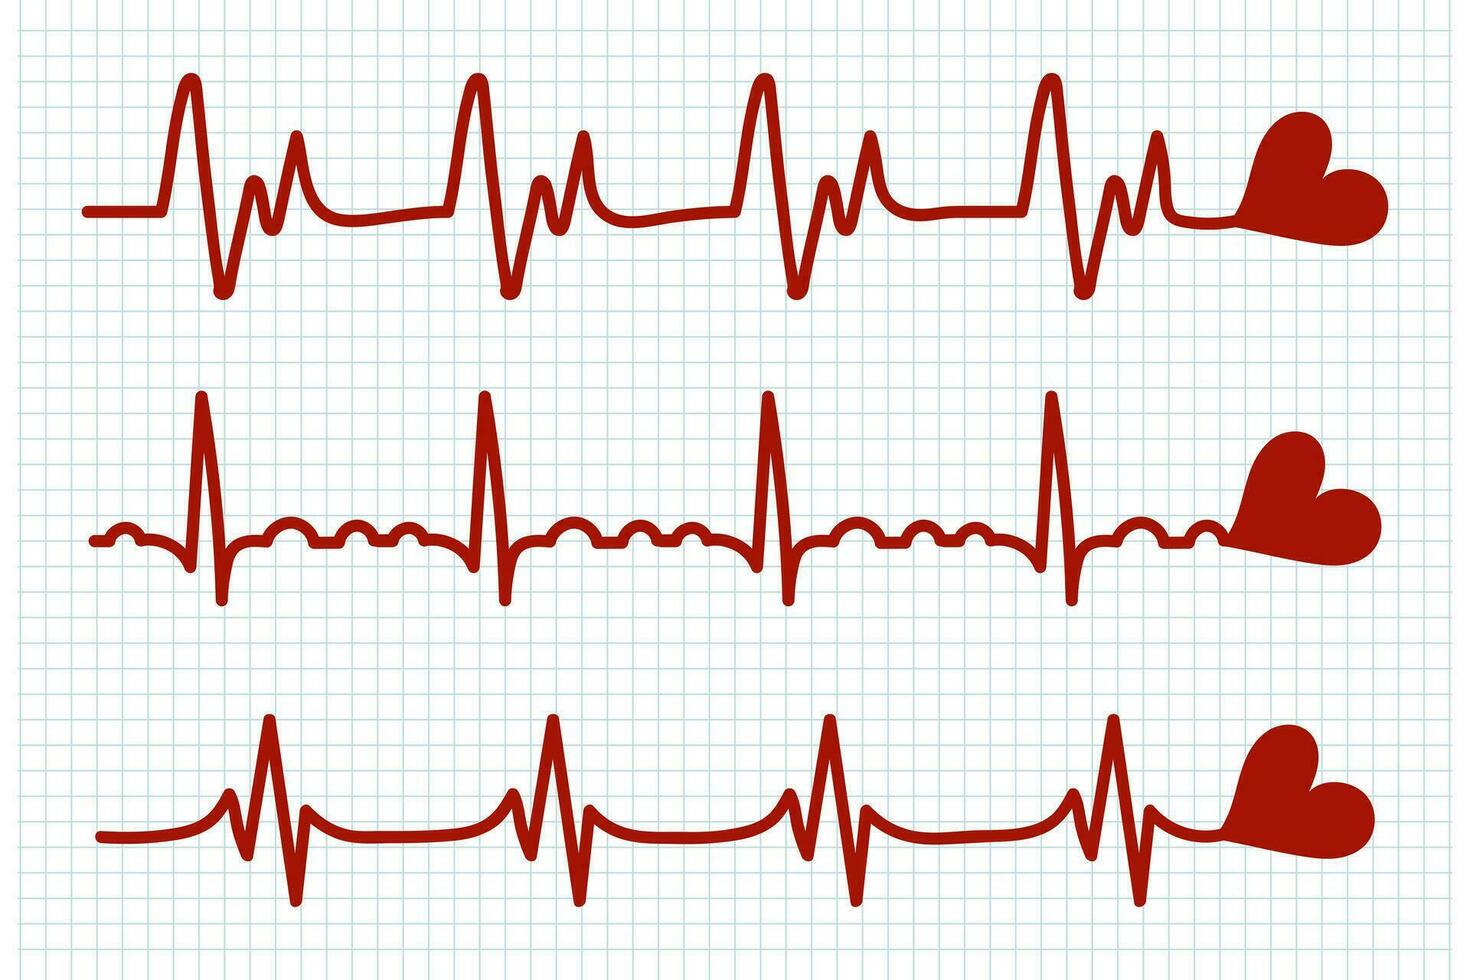 Heartbeat, icons set. Red heart beats on a checkered sheet. Cardiogram of the heart. Design elements, doodles, vector